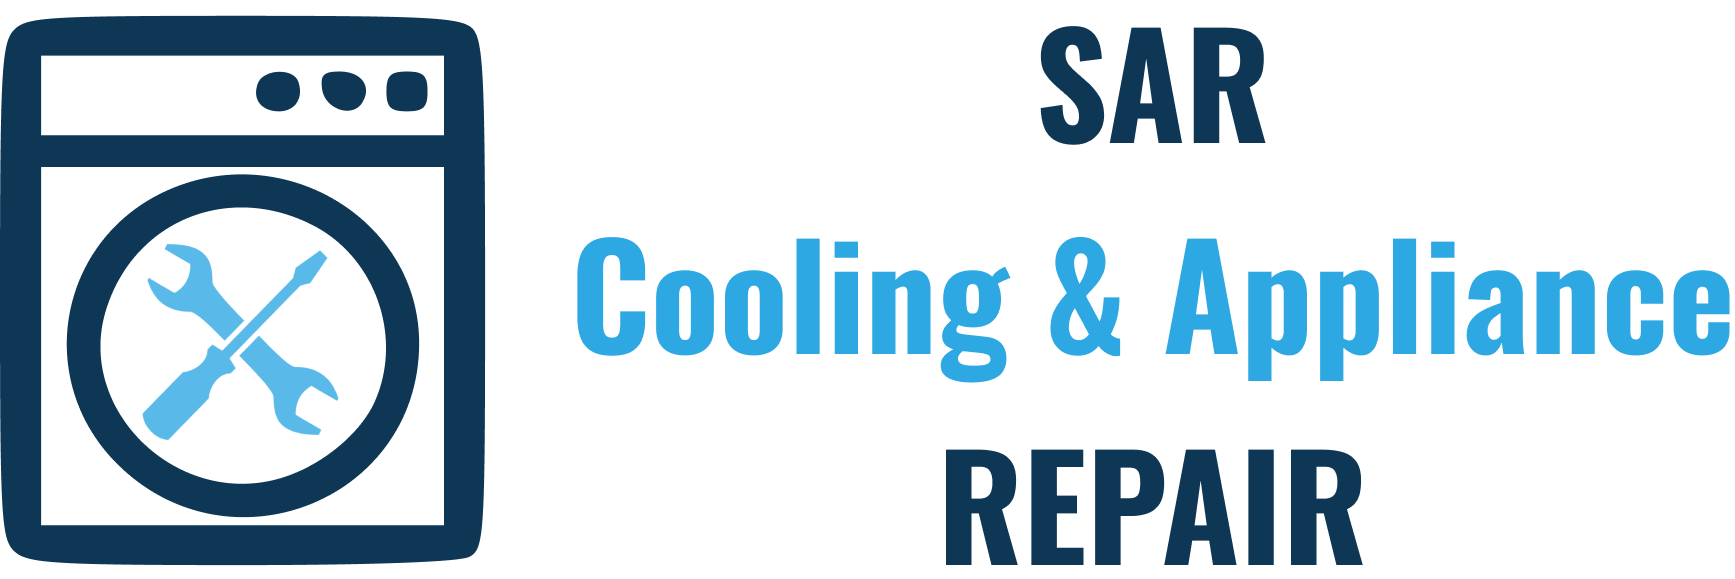 SAR Cooling and Appliance Repair